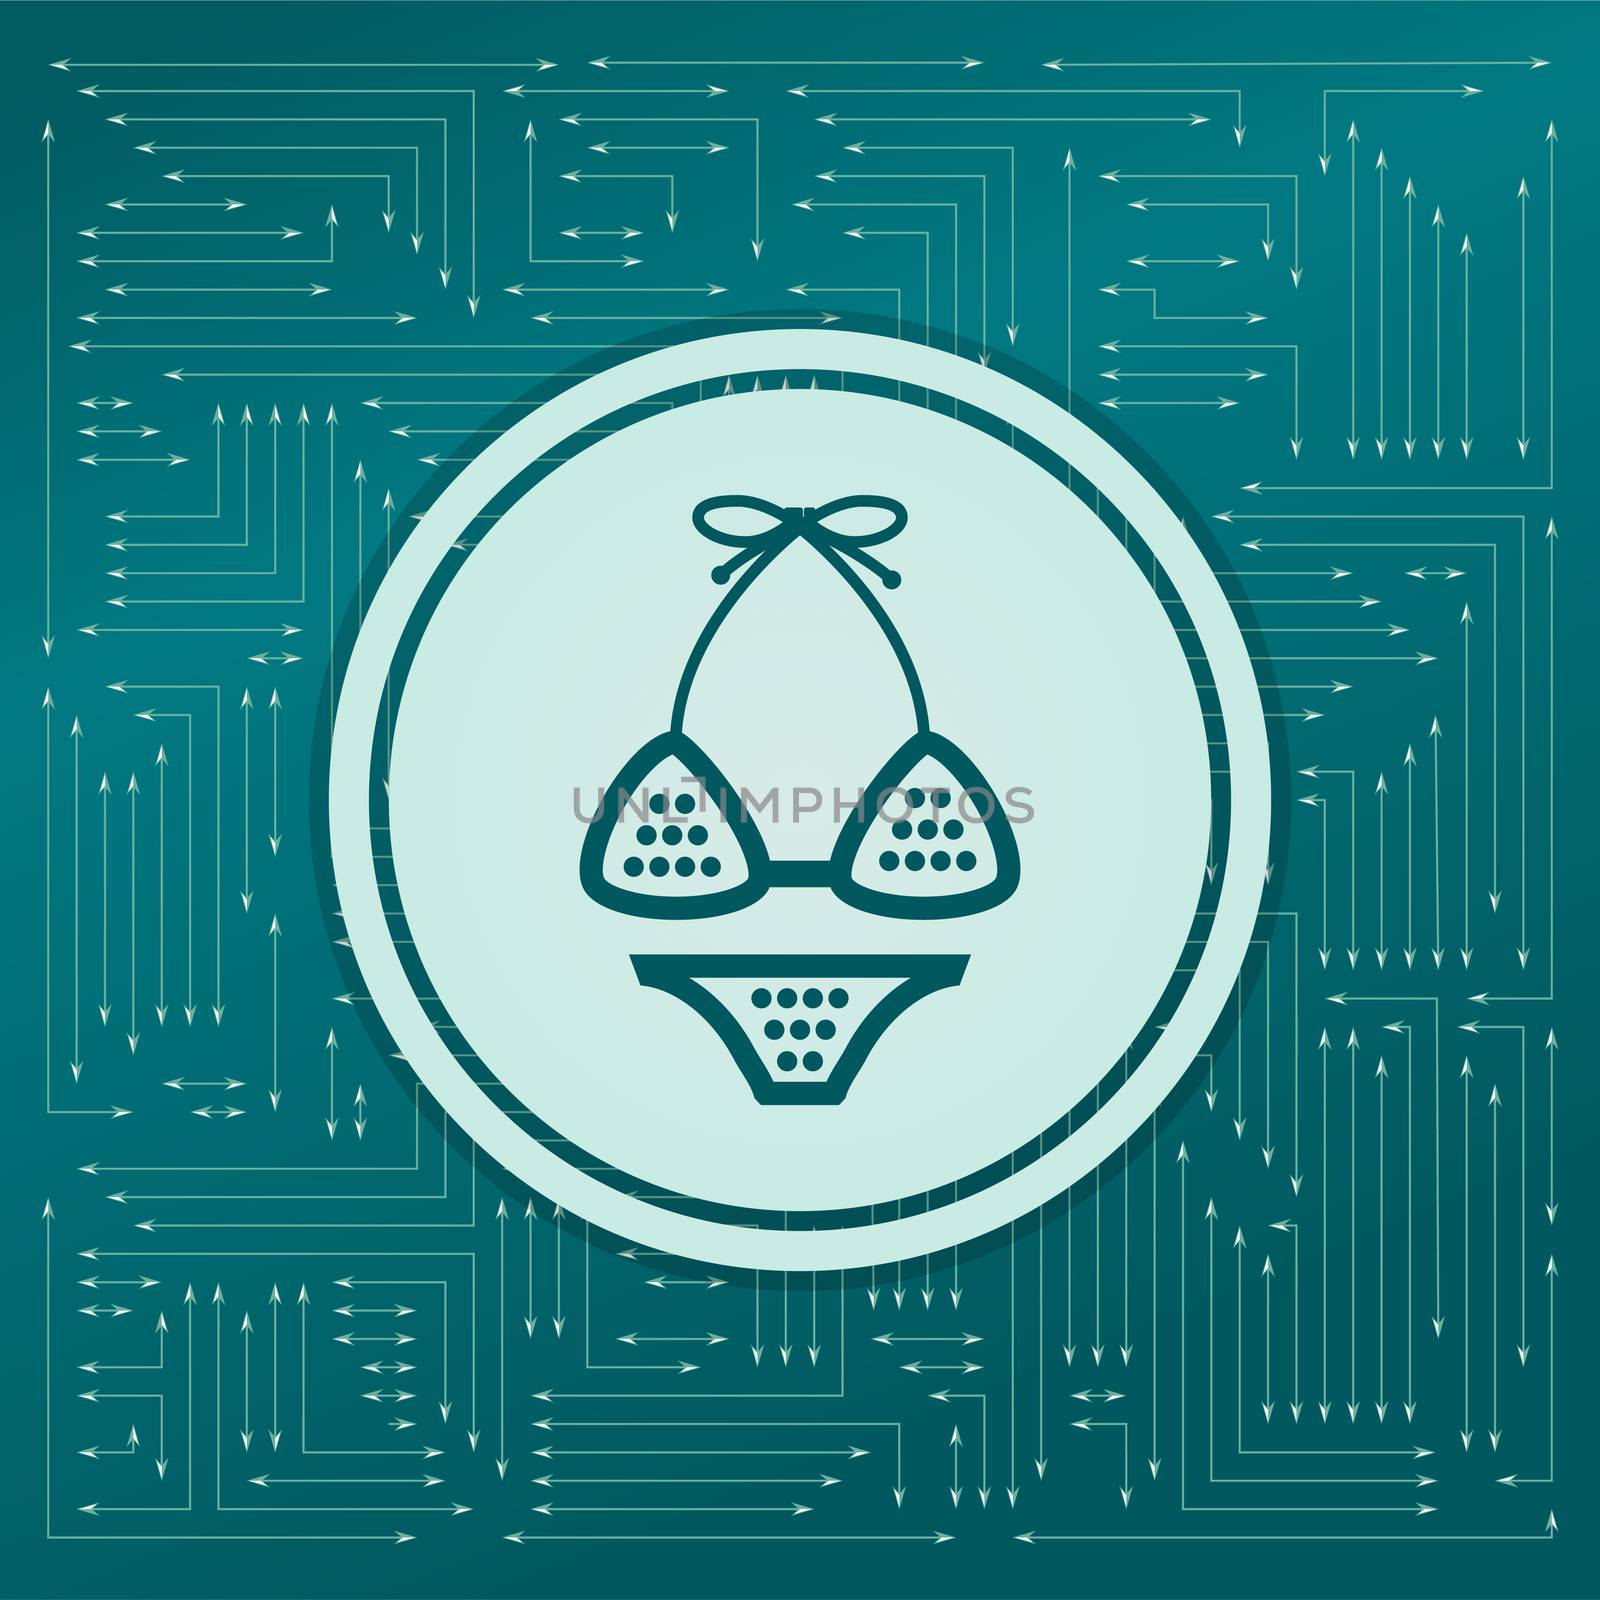 Underwear, bikini icon on a green background, with arrows in different directions. It appears on the electronic board. illustration